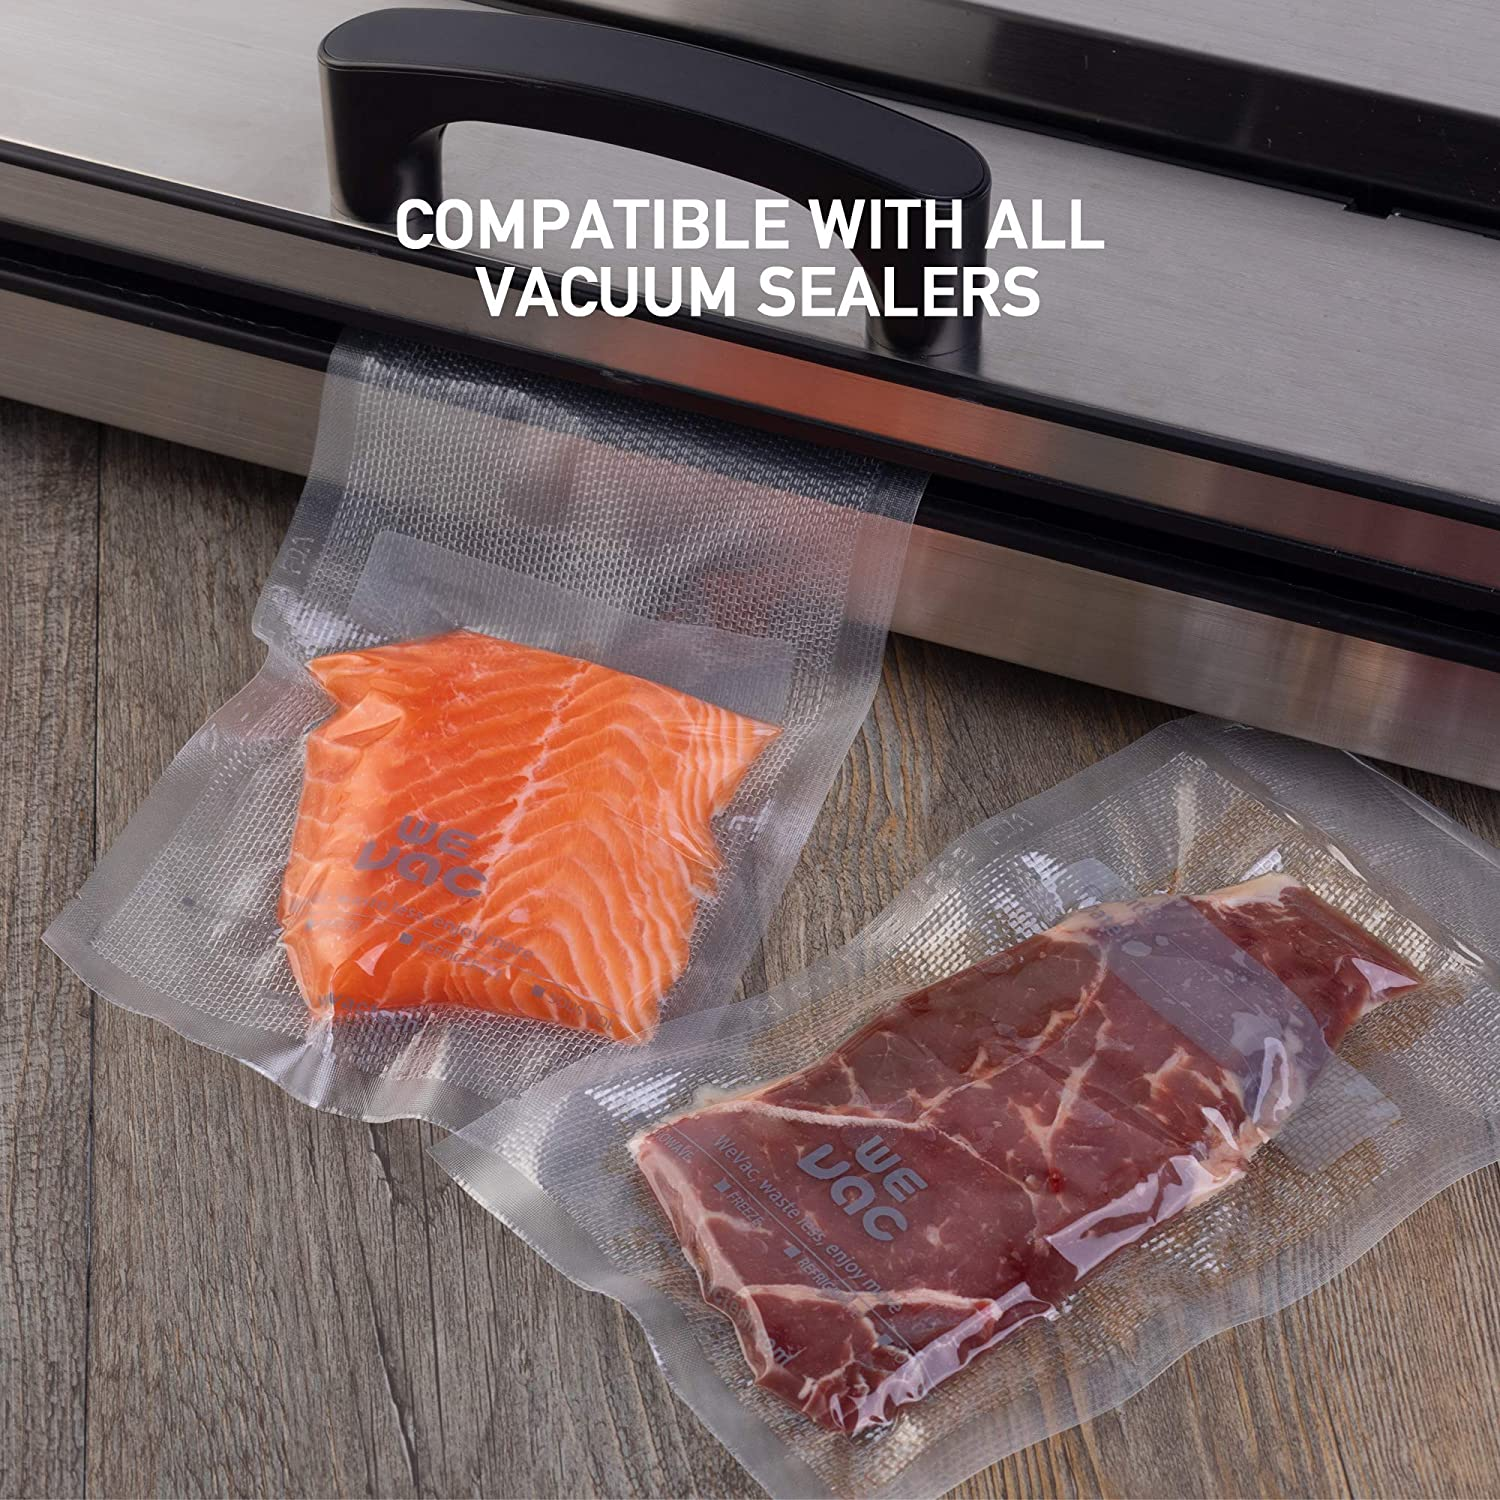 Vacuum Sealer Bags 8X50 Rolls 2 Pack for Food Saver, Seal a Meal, Weston. Commercial Grade, BPA Free, Heavy Duty, Great for Vac Storage, Meal Prep or Sous Vide